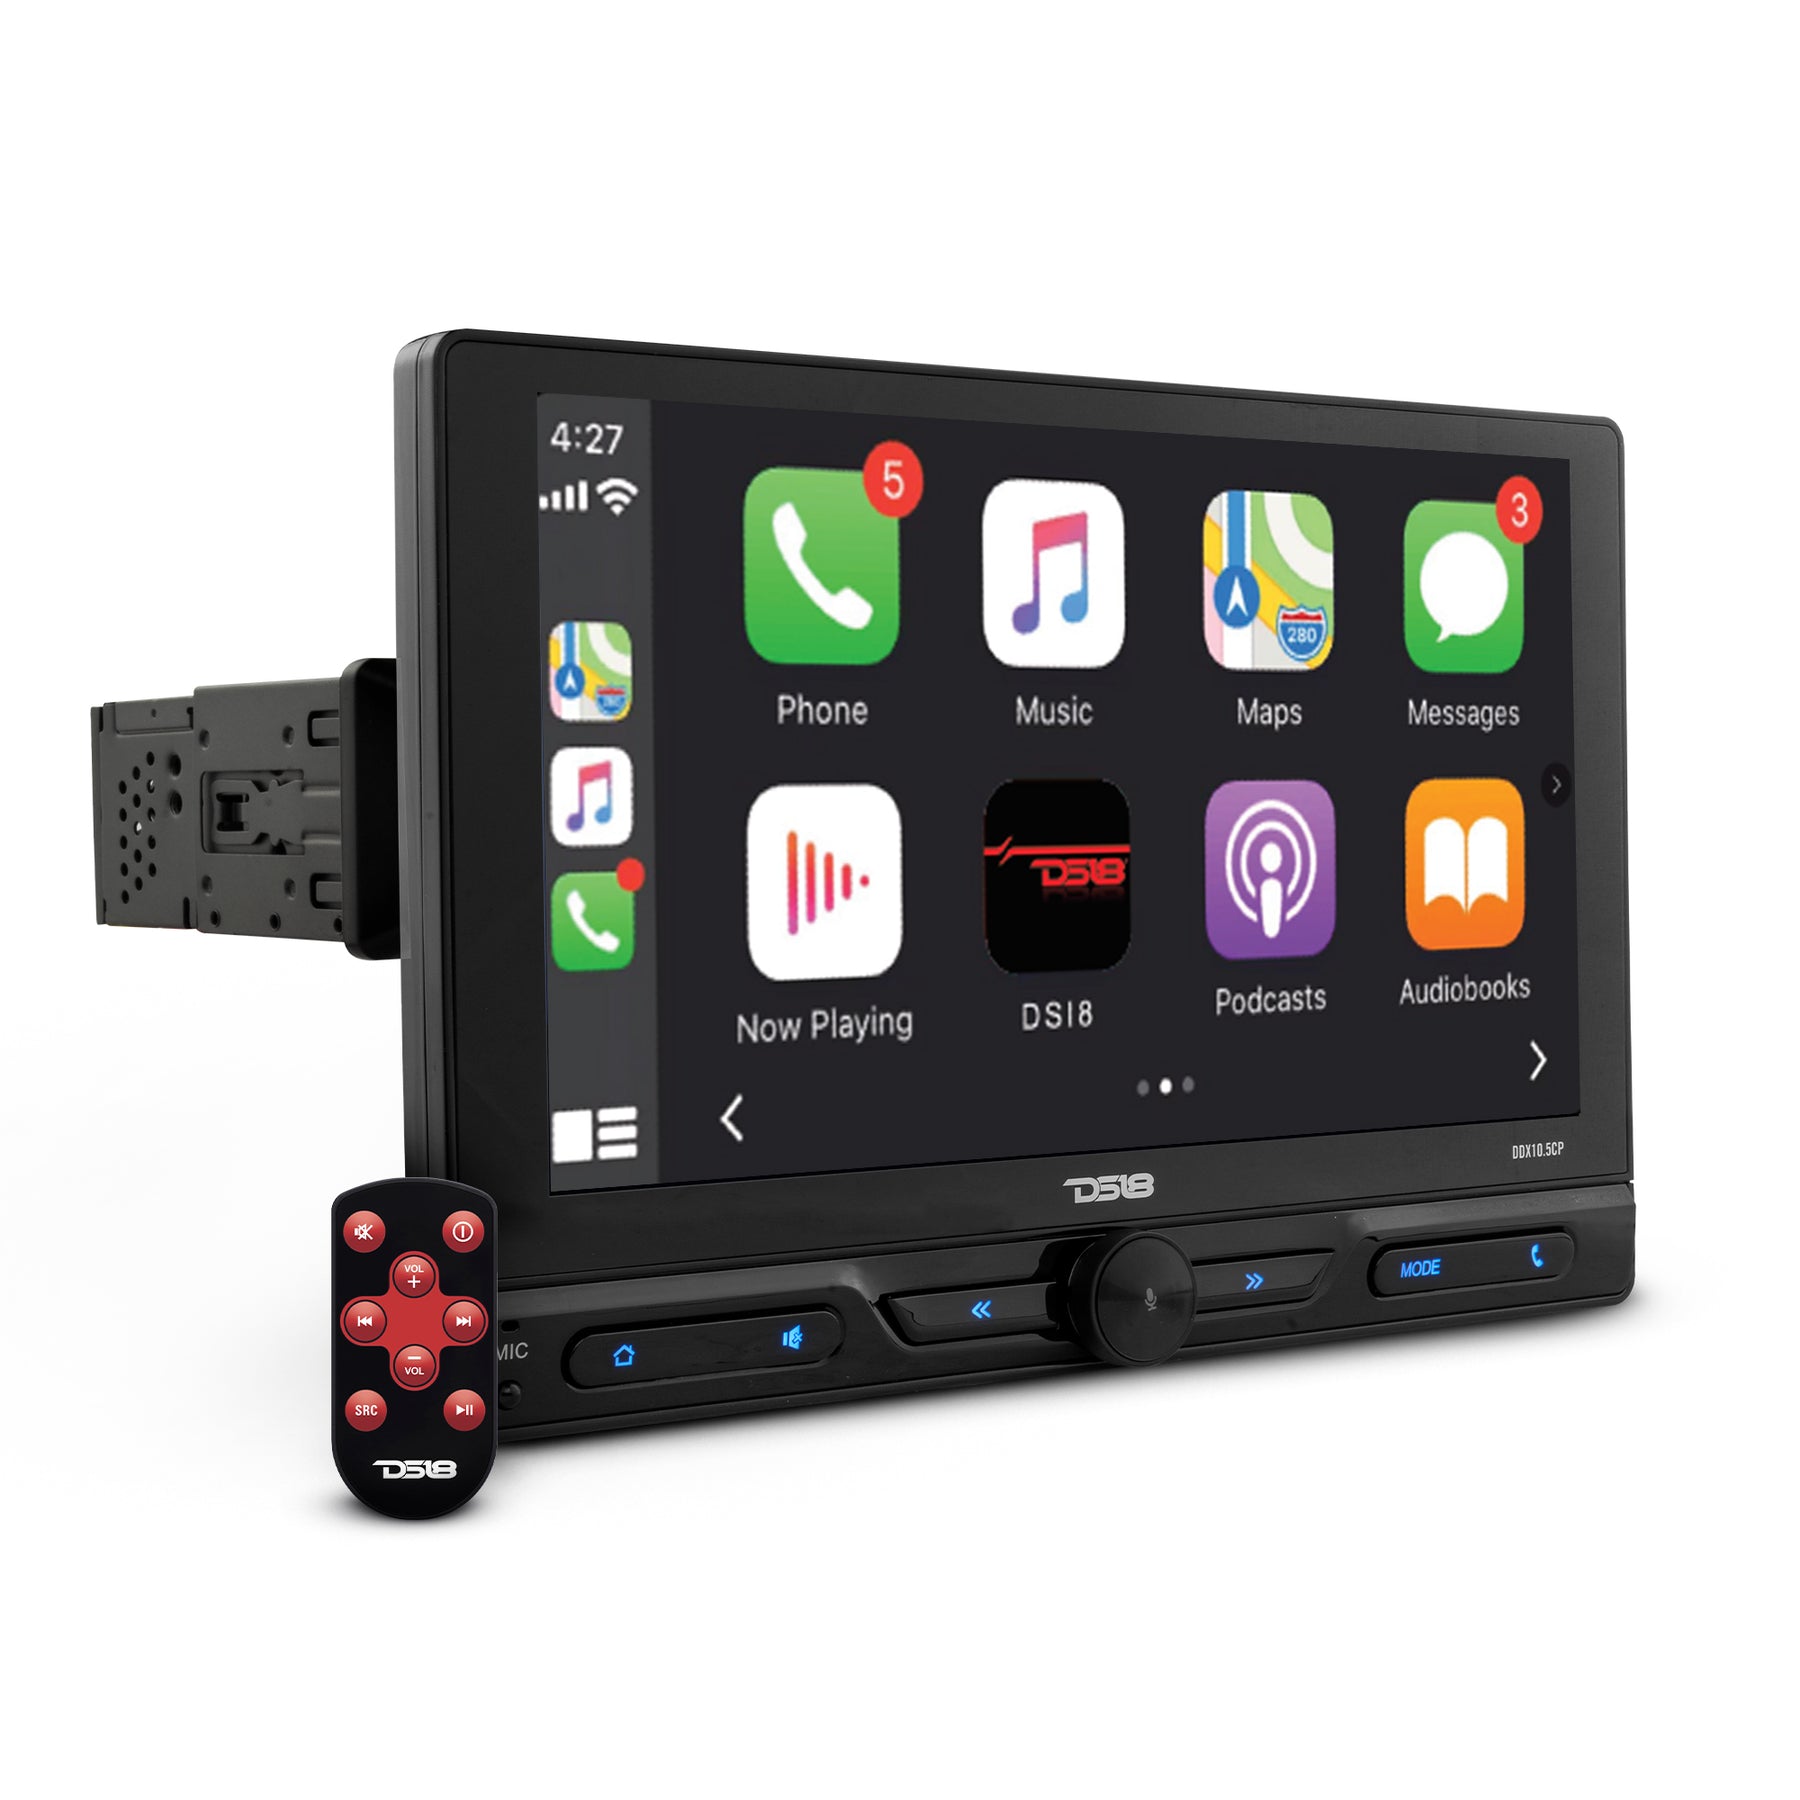 10.5" Floating Adjustable Modular Touchscreen Mechless Single-DIN Head Unit with Bluetooth, Apple Car Play, Android Mirror Link, USB, AUX, SD, AM, FM